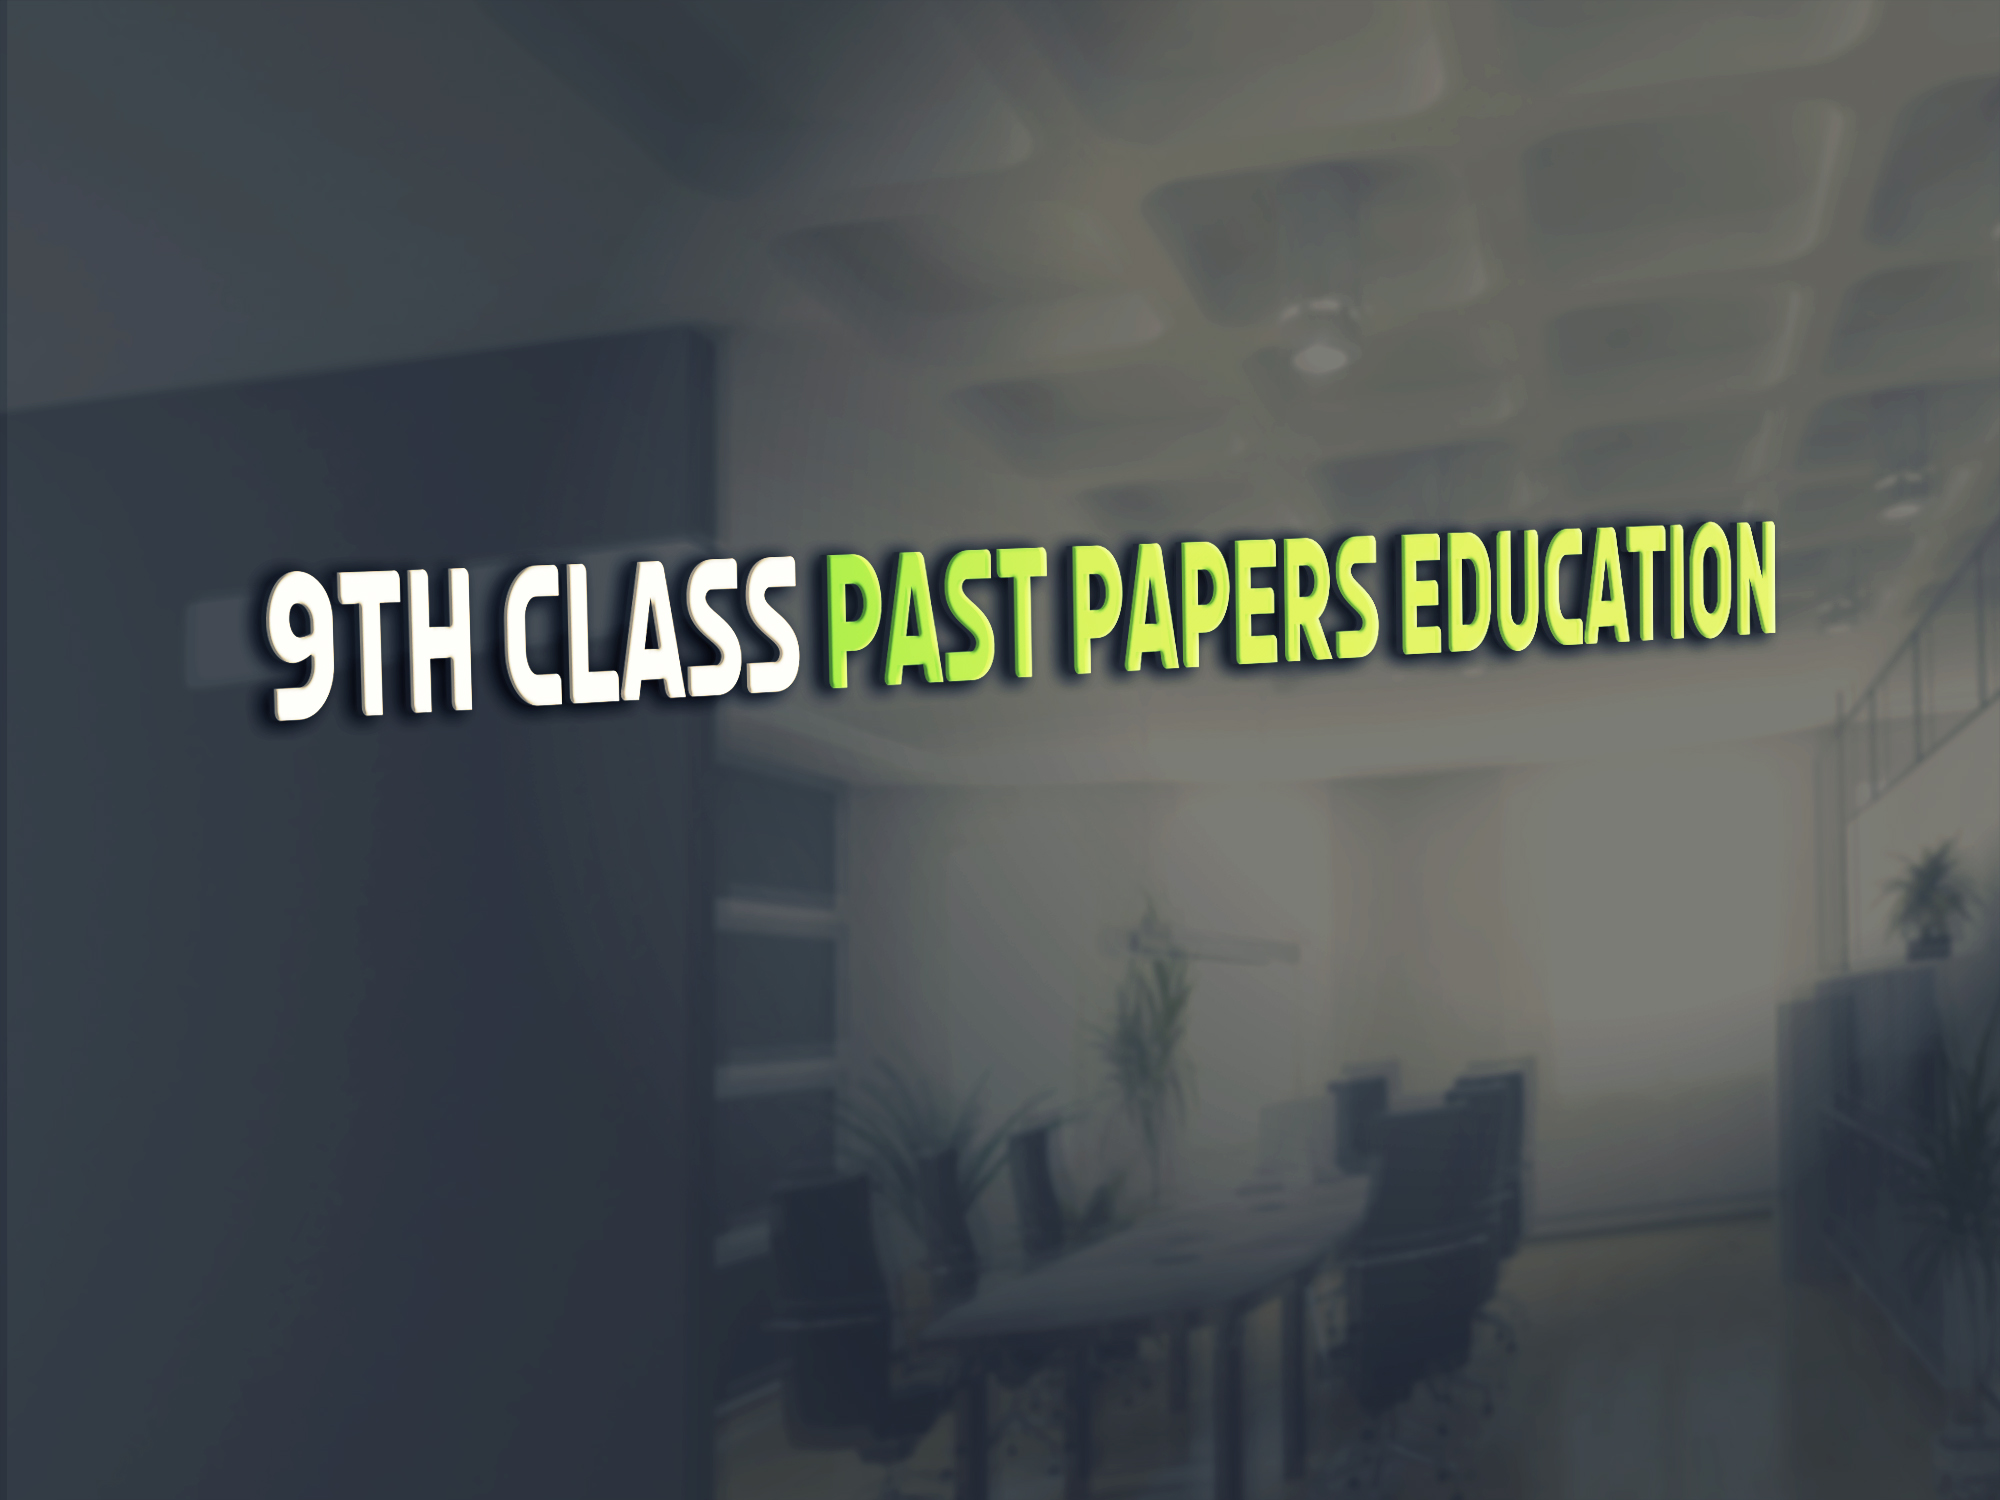 Education 9th Class Past Paper BISE Gujranwala 2018